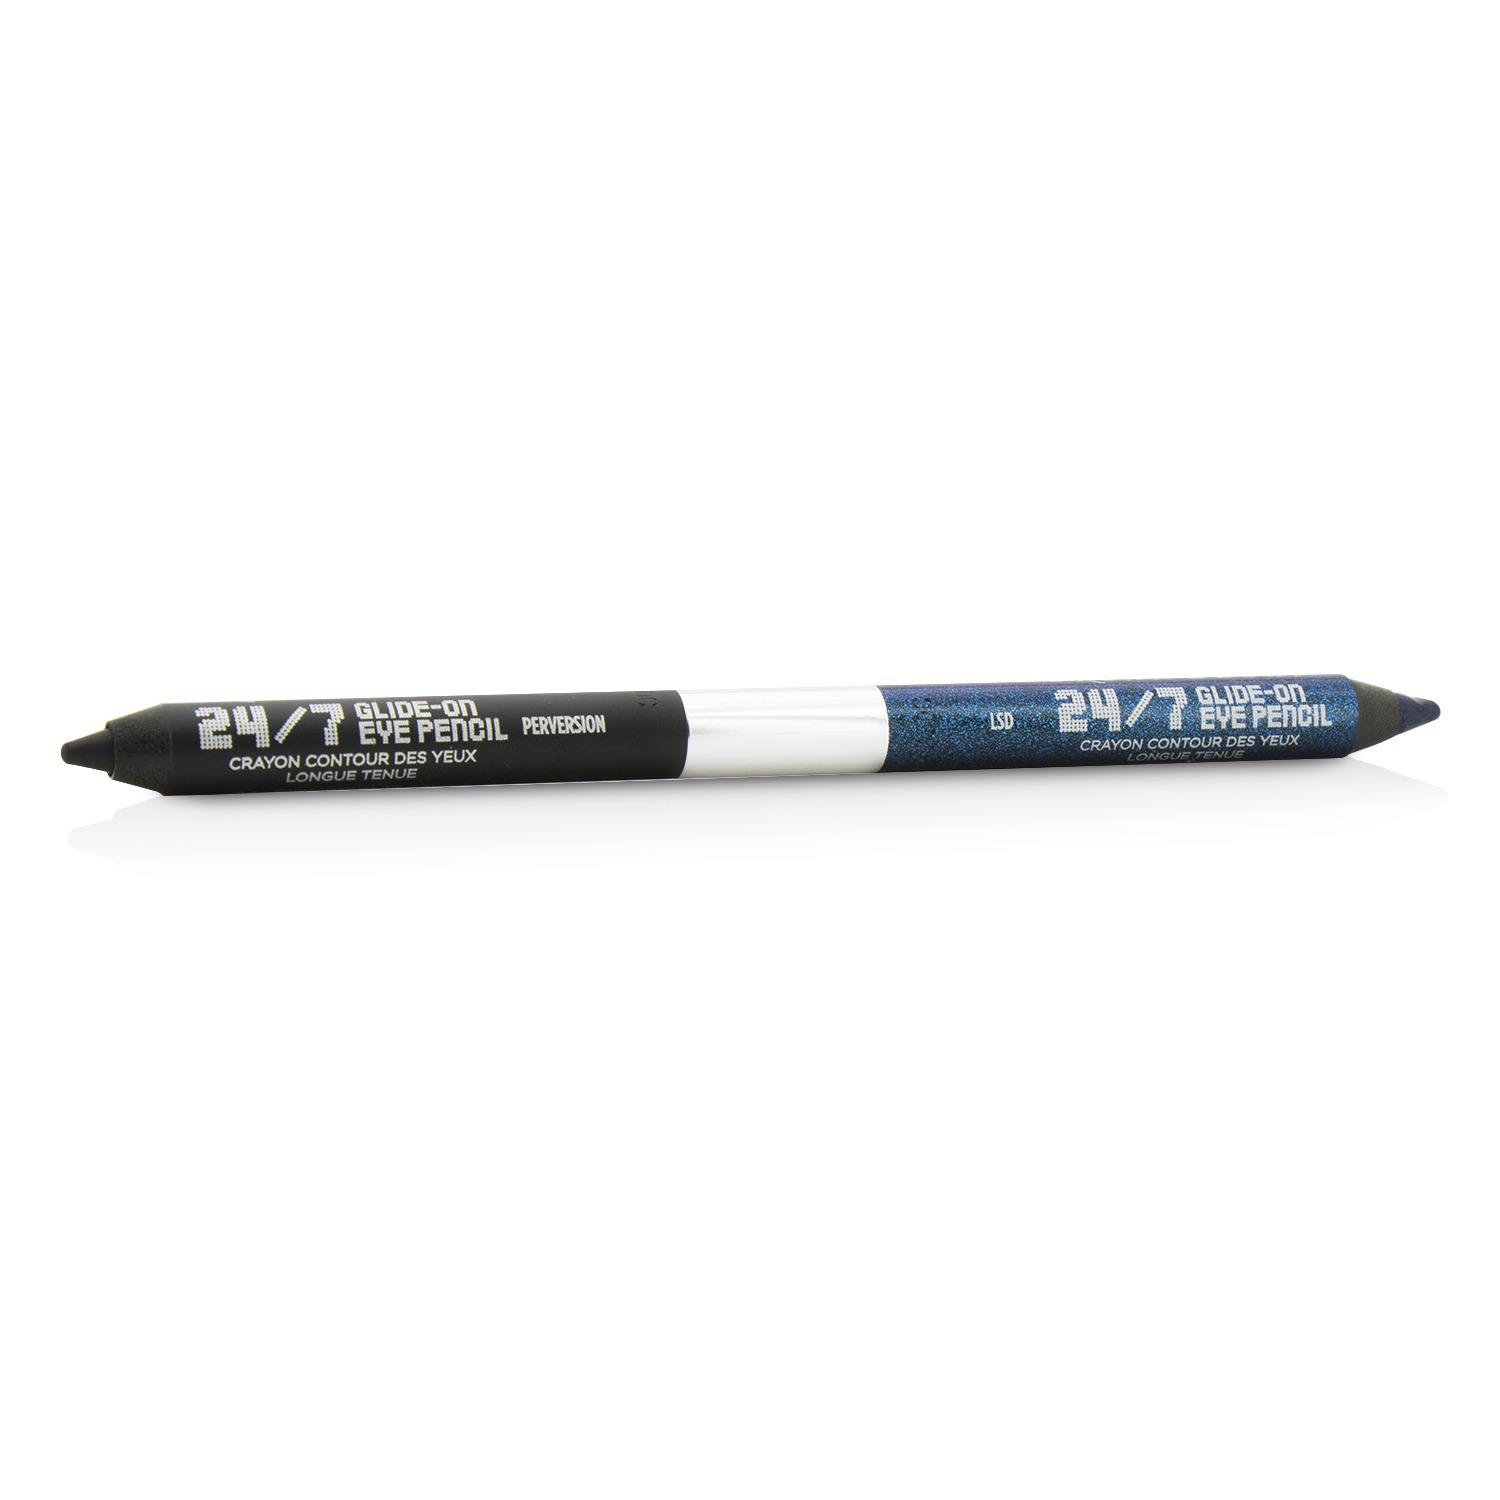 24/7 Glide On Double Ended Eye Pencil  - Perversion/LSD (Unboxed) Urban Decay Image